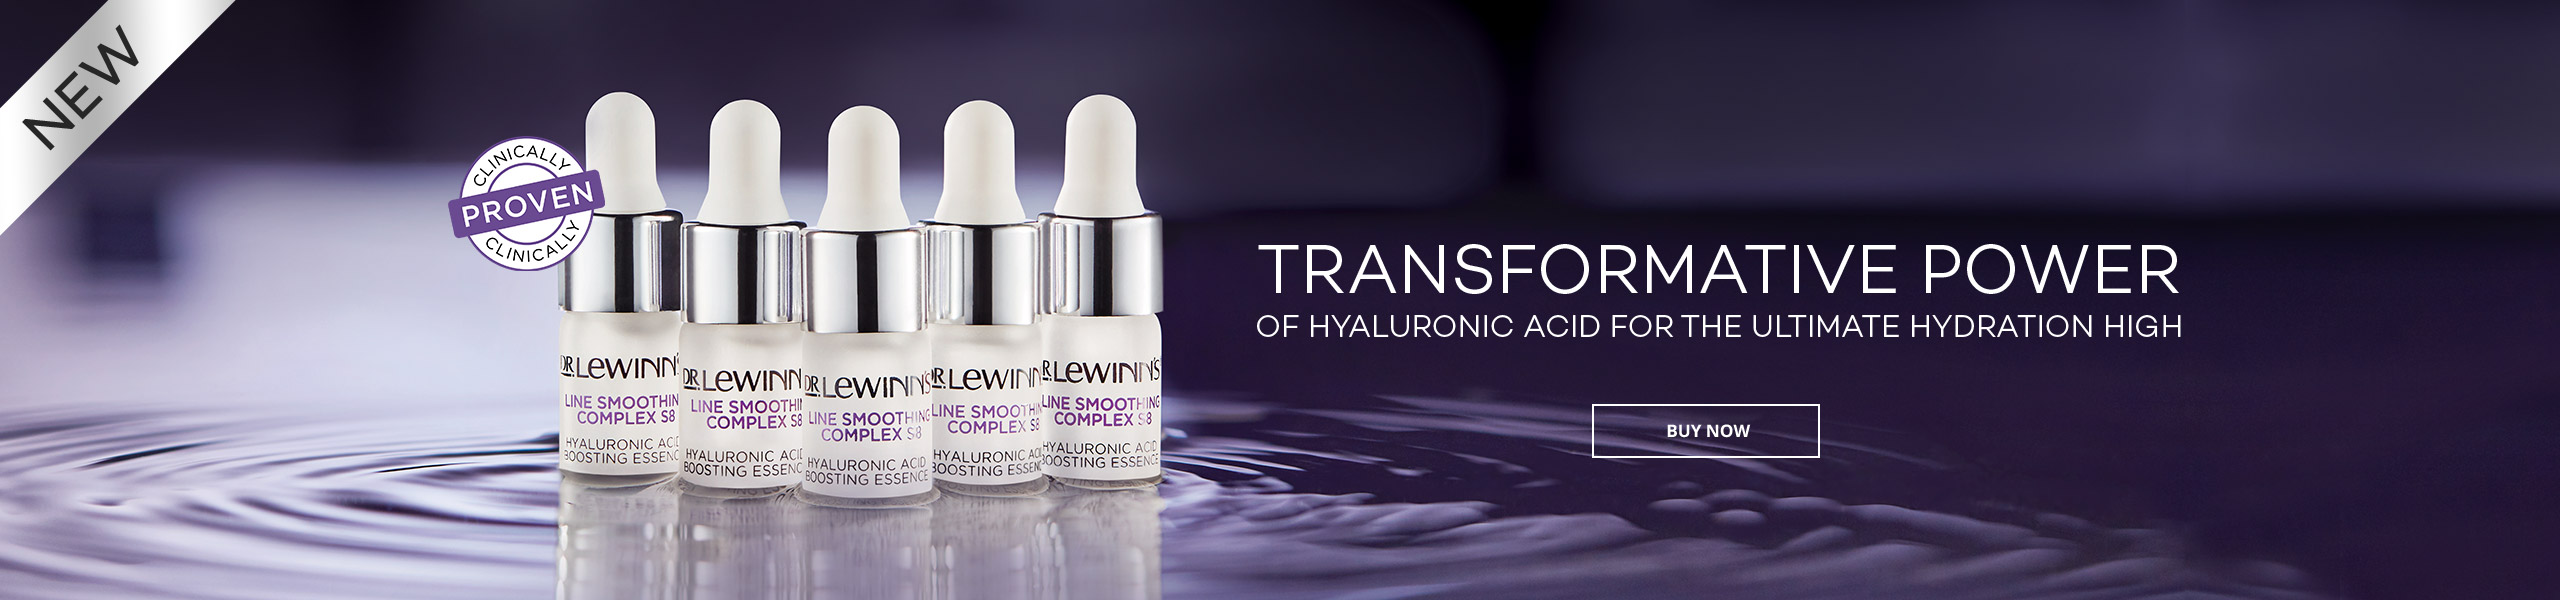 Line Smoothing Complex Hyaluronic Acid Boosting Essence - Transformative Power of Hyaluronic Acid for the Ultimate Hydration High